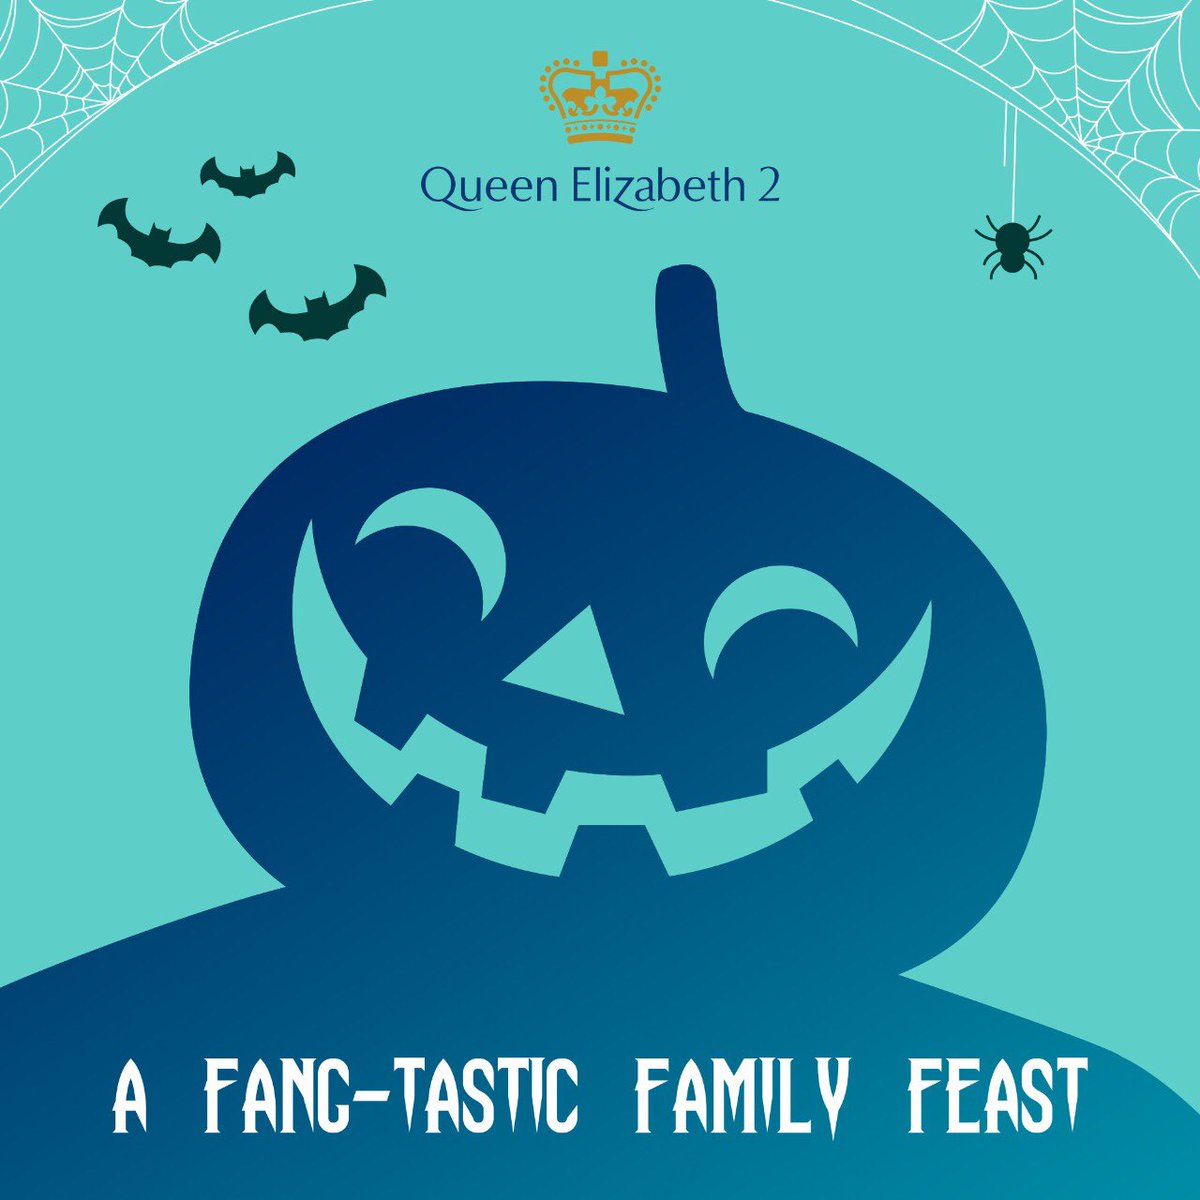 The QE2 Halloween Family Fest! Location: The Pavilion – 1 Deck Date: Friday 30 October 2020 Time: 6pm to 9pm Book now: Email reservations@qe2.com Call +971600500400 qe2.com/offers/hallowe… #stillmakinghistory #qe2 #qe2dubai